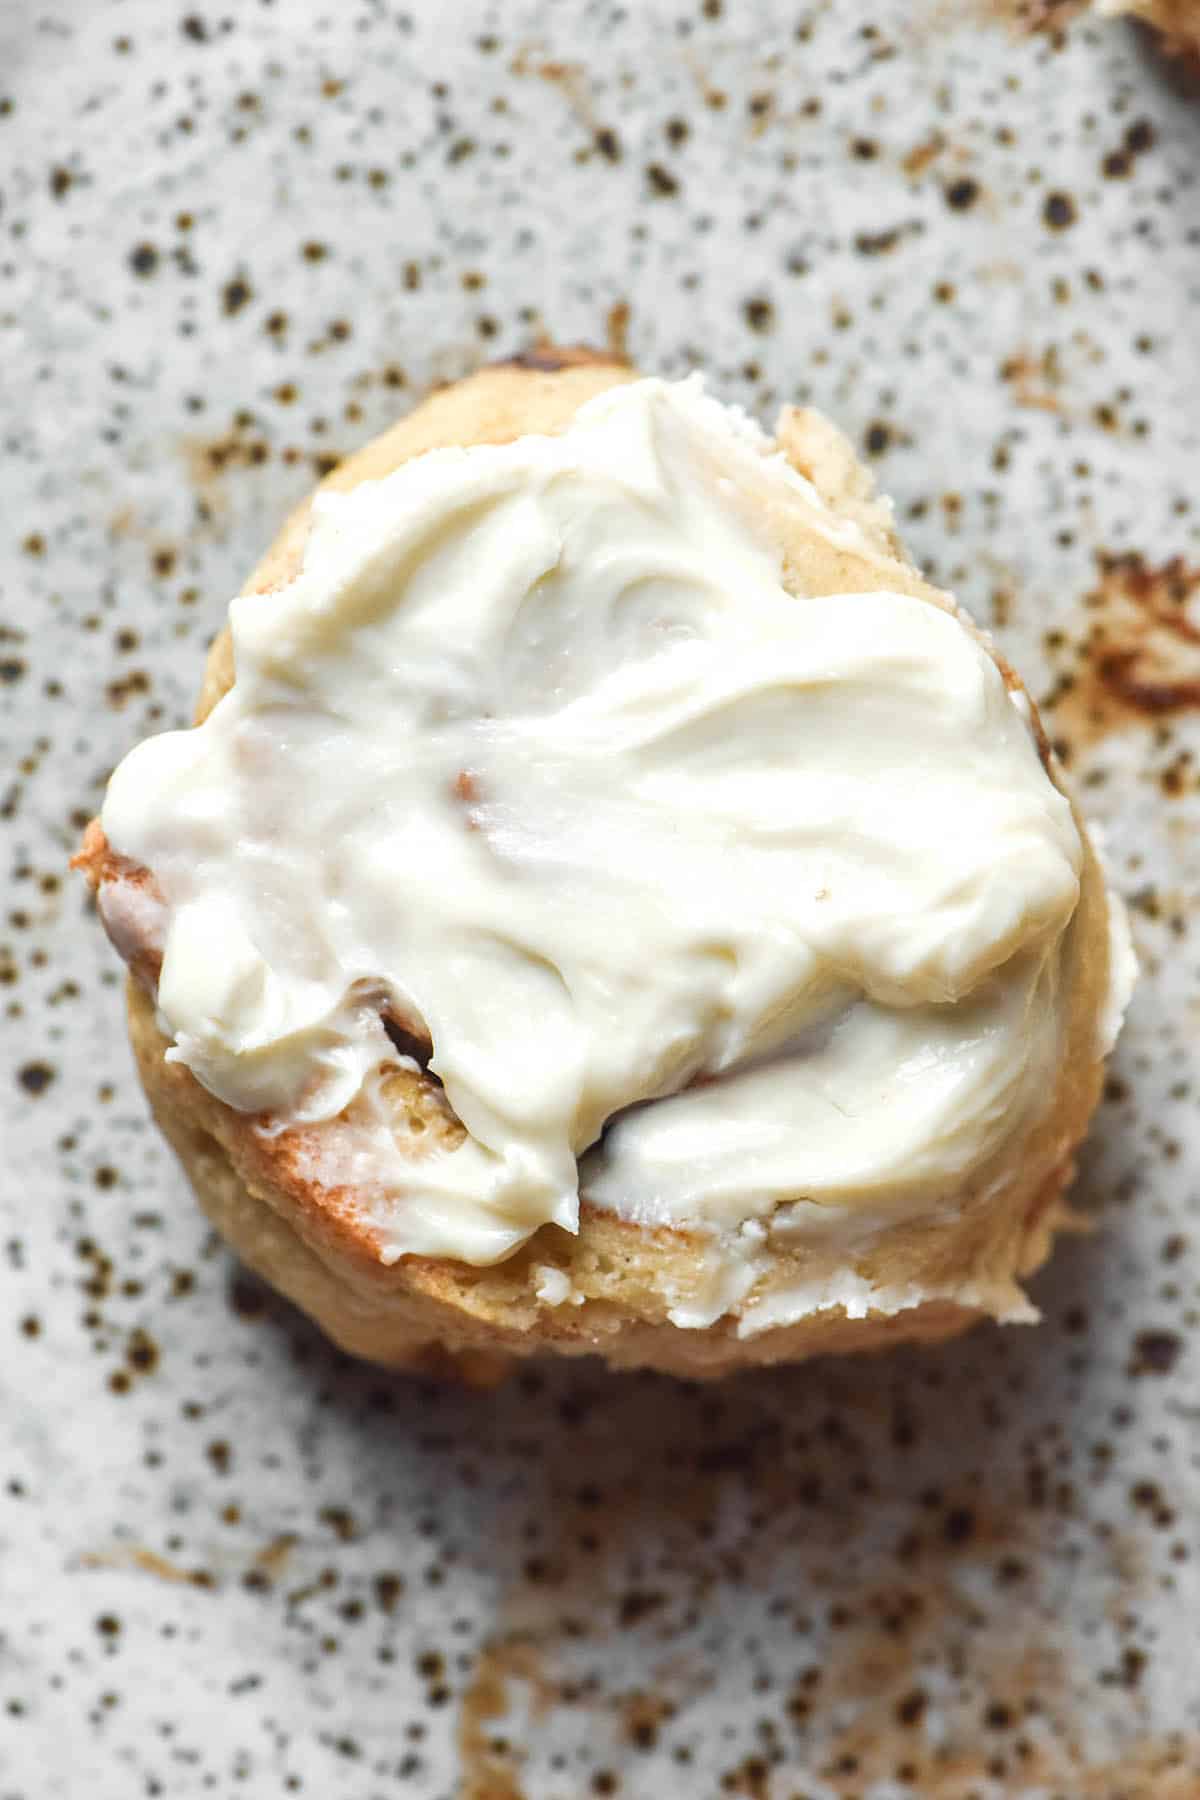 A close up aerial image of a gluten free yeast free cinnamon roll on a white speckled ceramic plate. The bun is golden brown and smothered in cream cheese icing.